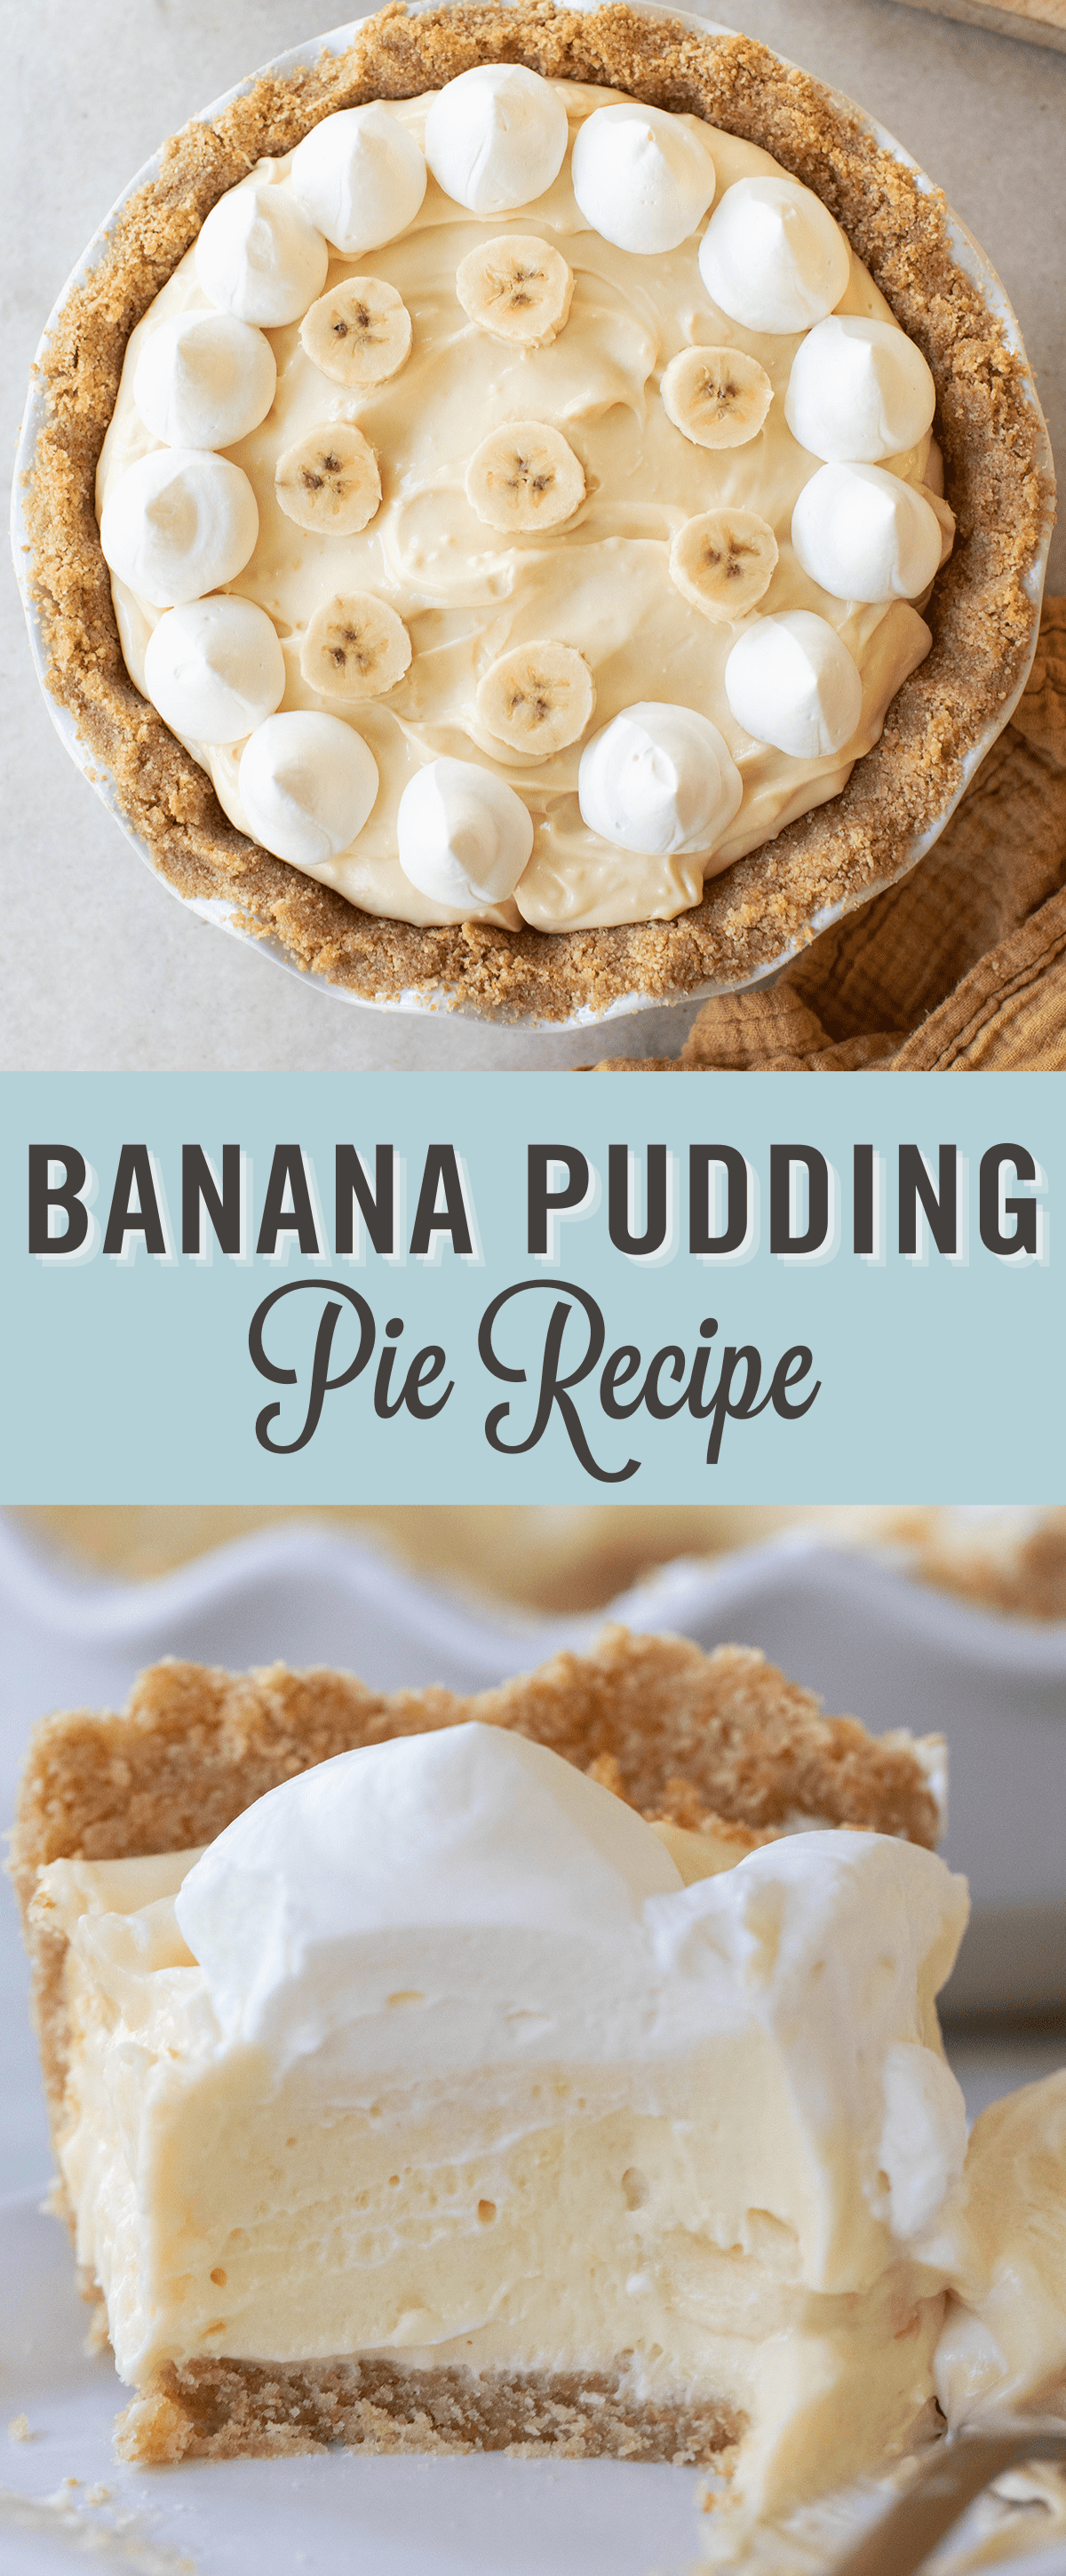 Banana pudding pie recipe with title.